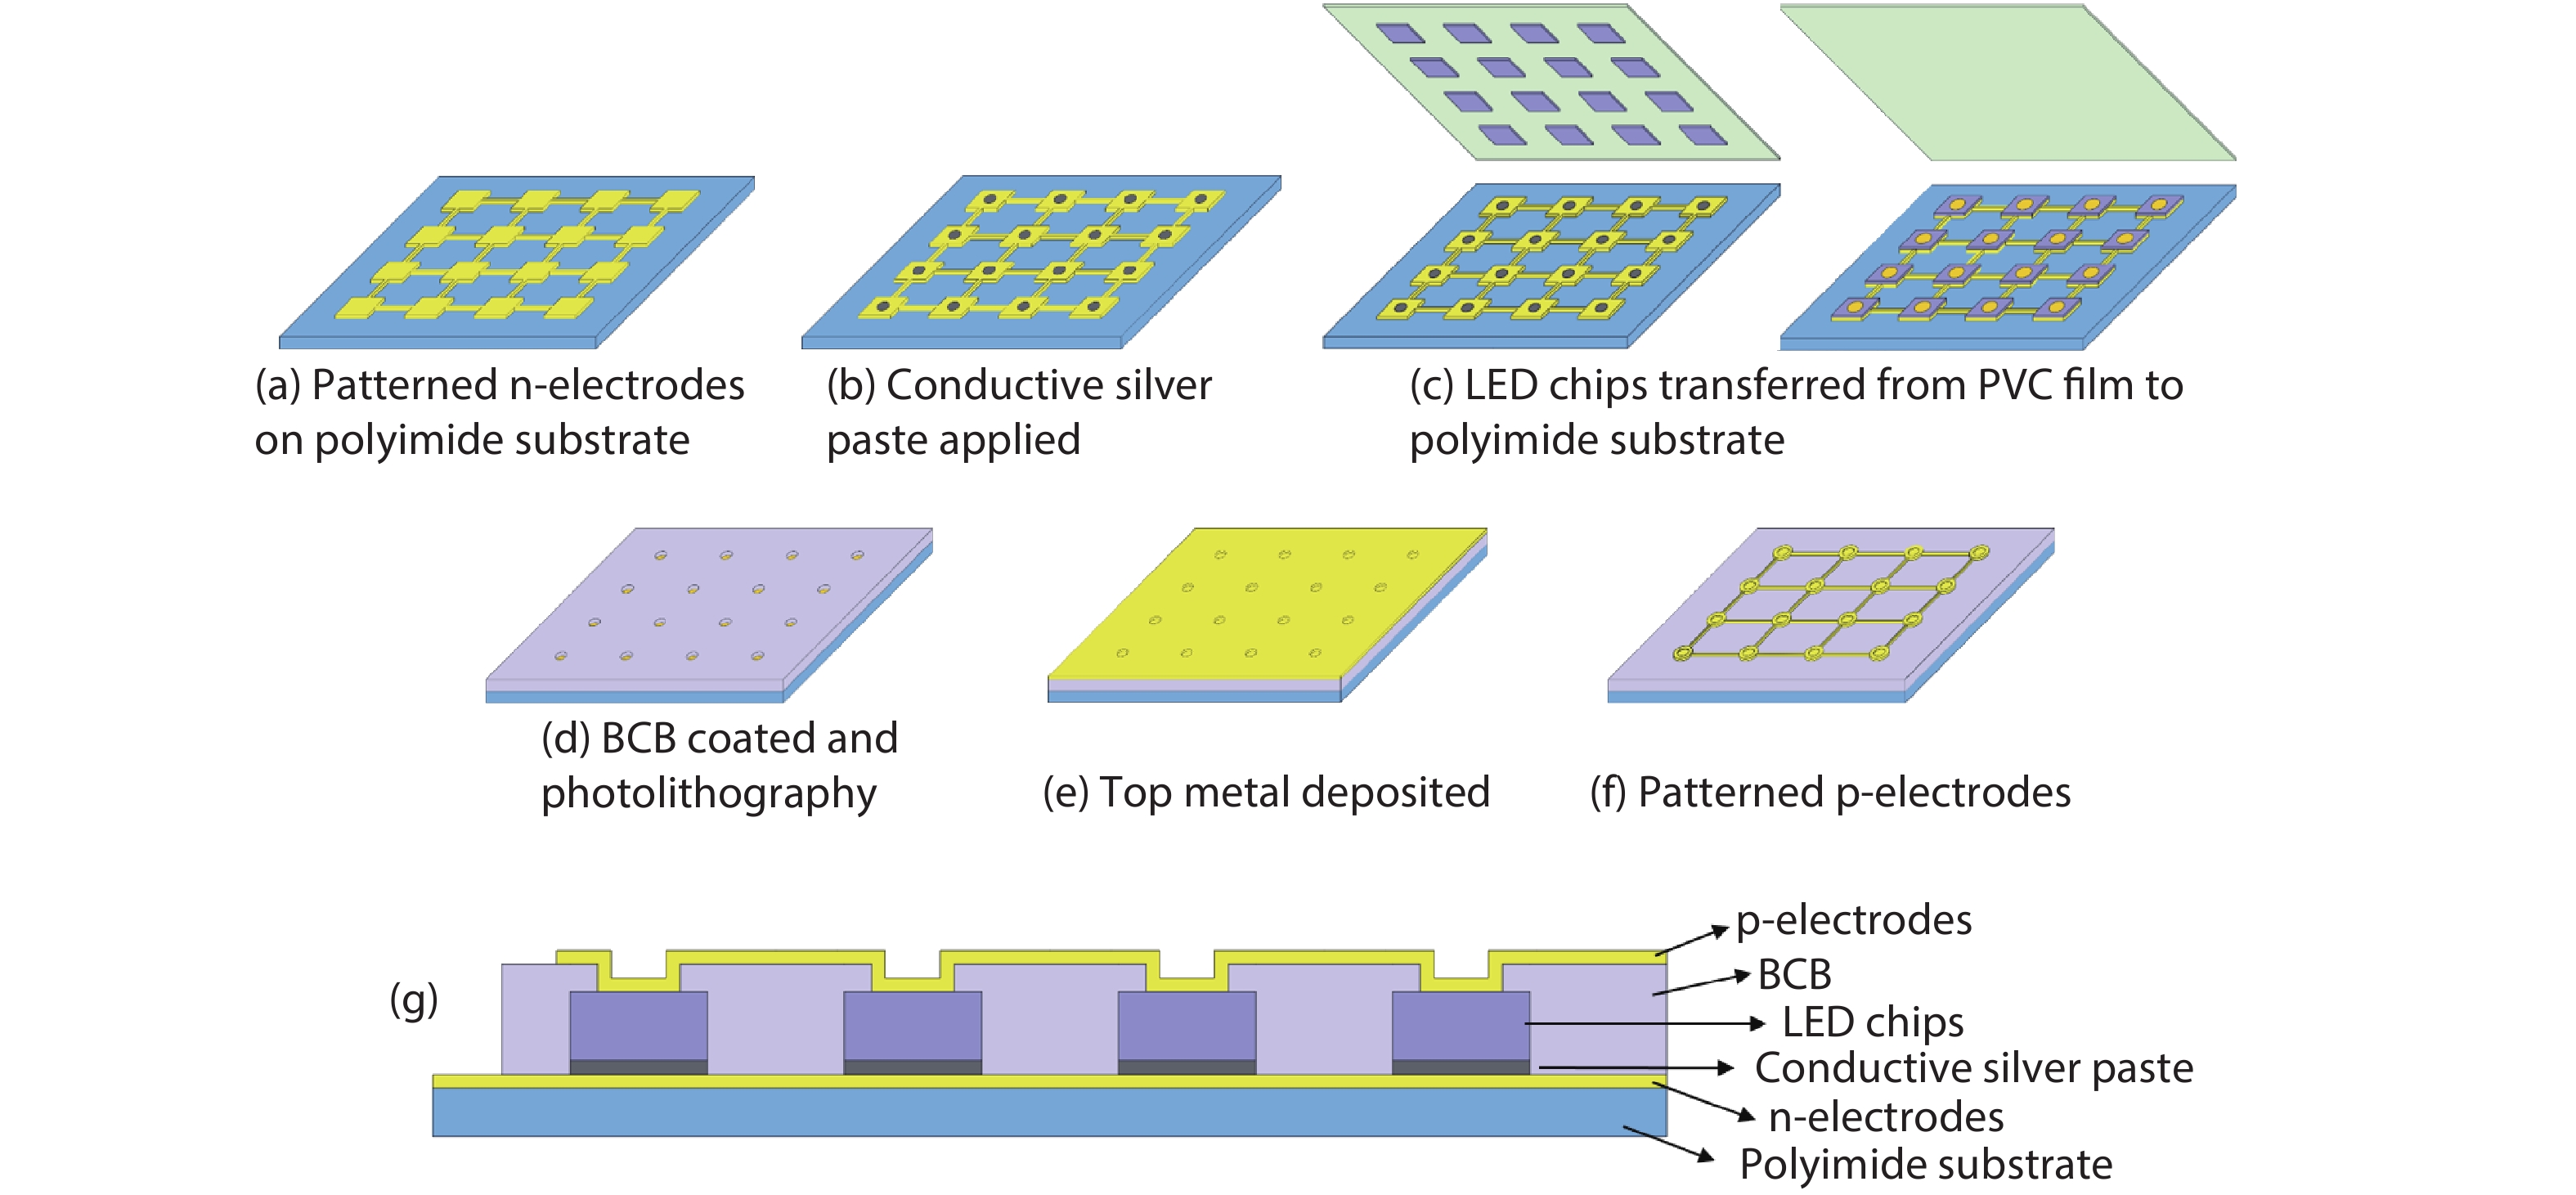 (Color online) Illustration of fabrication process of flexible LEDs. (a) After Ti/Au layer deposition and photolithography, the bottom n-electrodes are patterned on the polyimide substrate. (b) Application of conductive silver paste. (c) Transfer of LED chips from PVC film to polyimide substrate. (d) BCB coating and then photolithography to expose the top electrodes of LEDs. (e) Top metal layer deposition. (f) Patterned top p-electrodes after photolithography. (g) Schematic cross section of flexible LEDs.